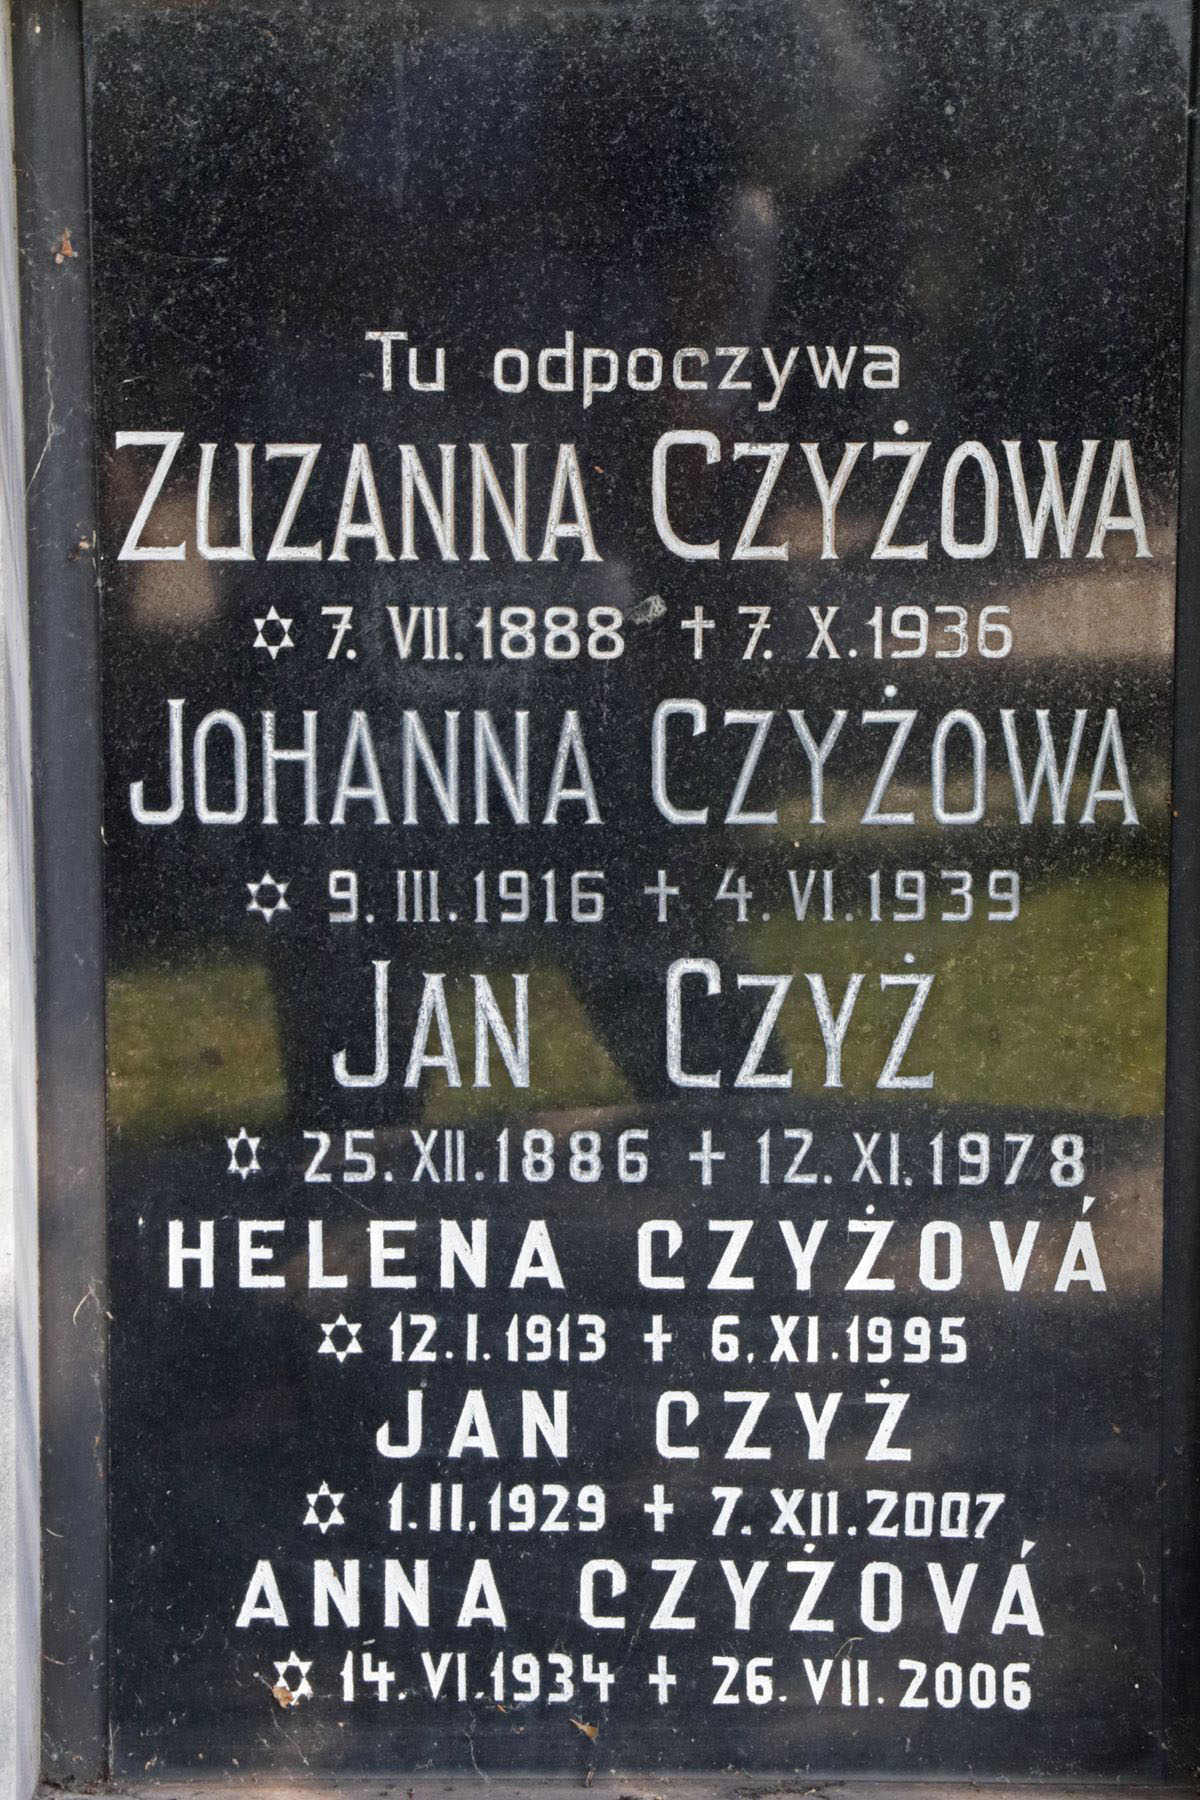 Inscription from the tombstone of the Czyż family, Sibica cemetery